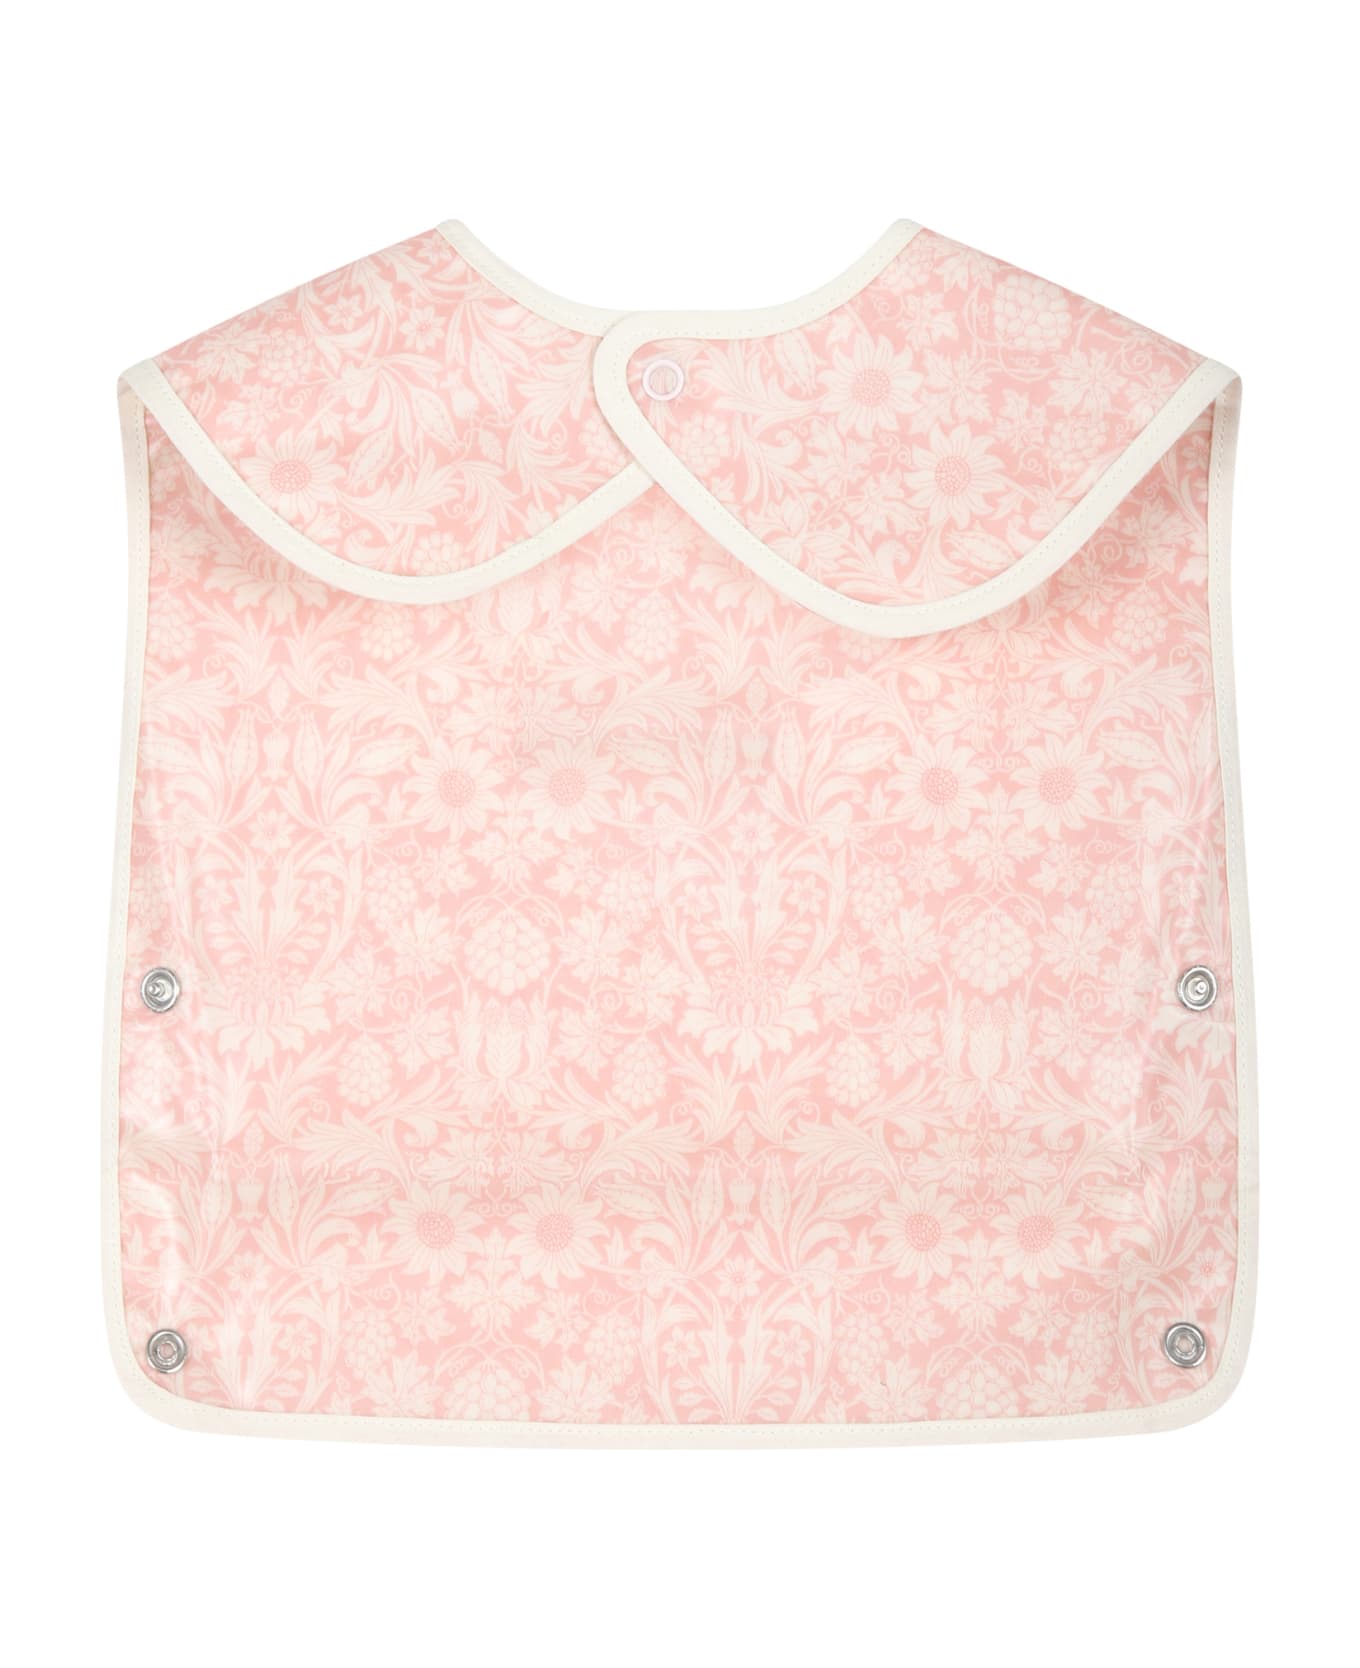 Bonpoint Pink Bib For Baby Girl With Flower Print - Pink